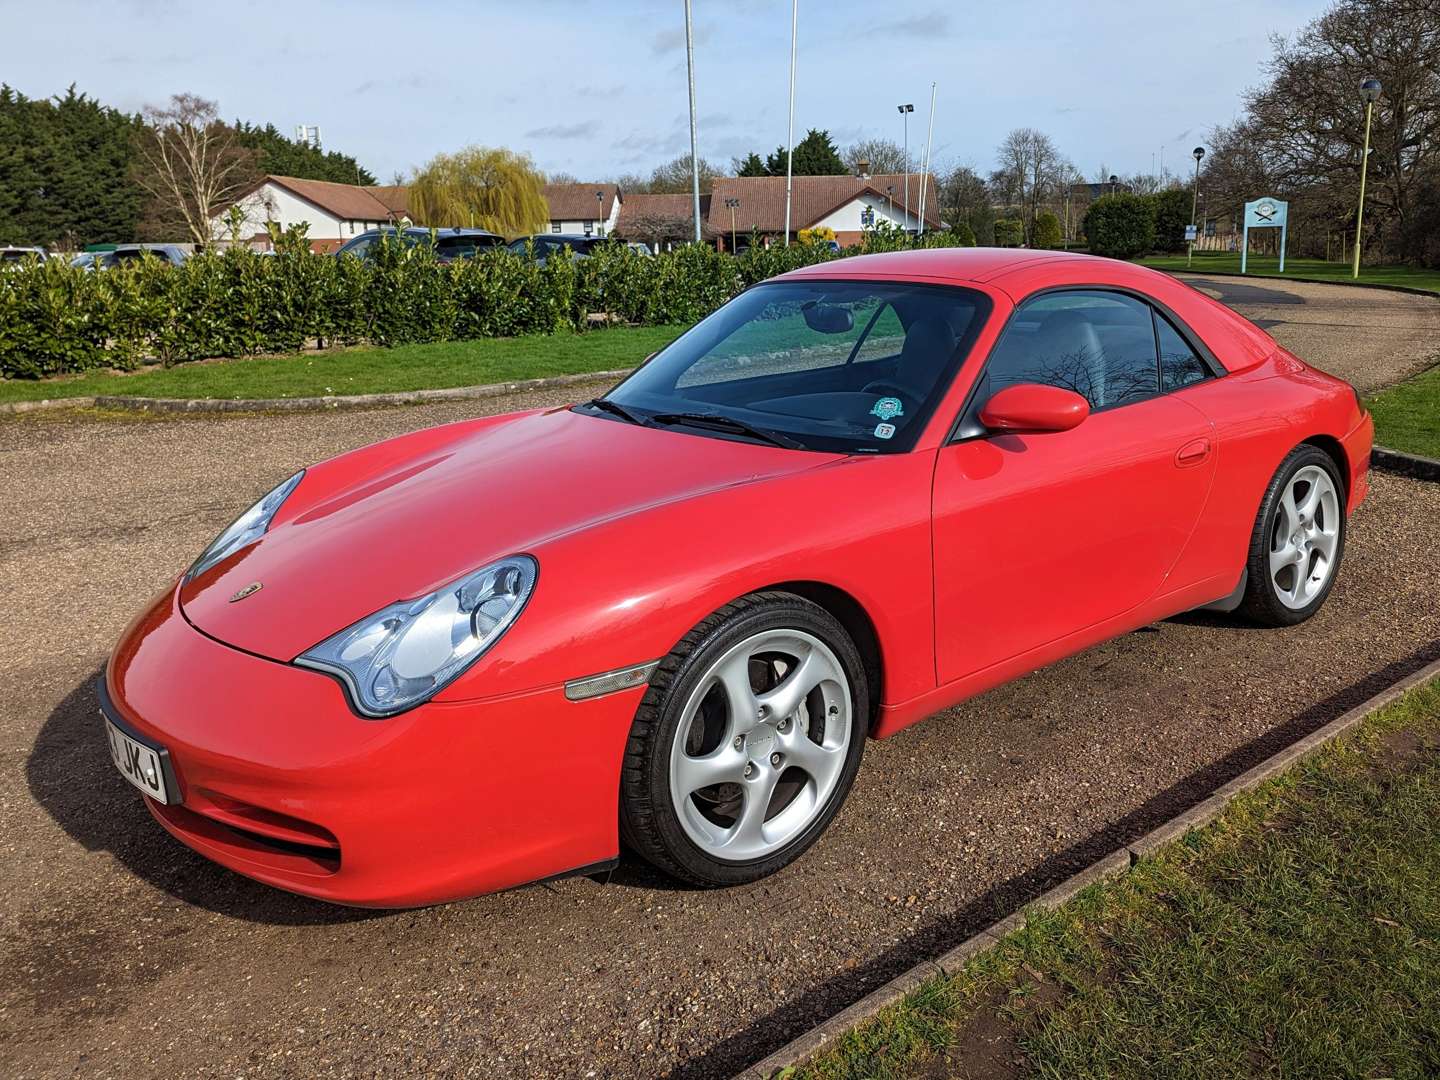 2003 PORSCHE (996) 911 3.6 C4 TIPTRONIC CONVERTIBLE LHD ONE OWNER - Image 4 of 26